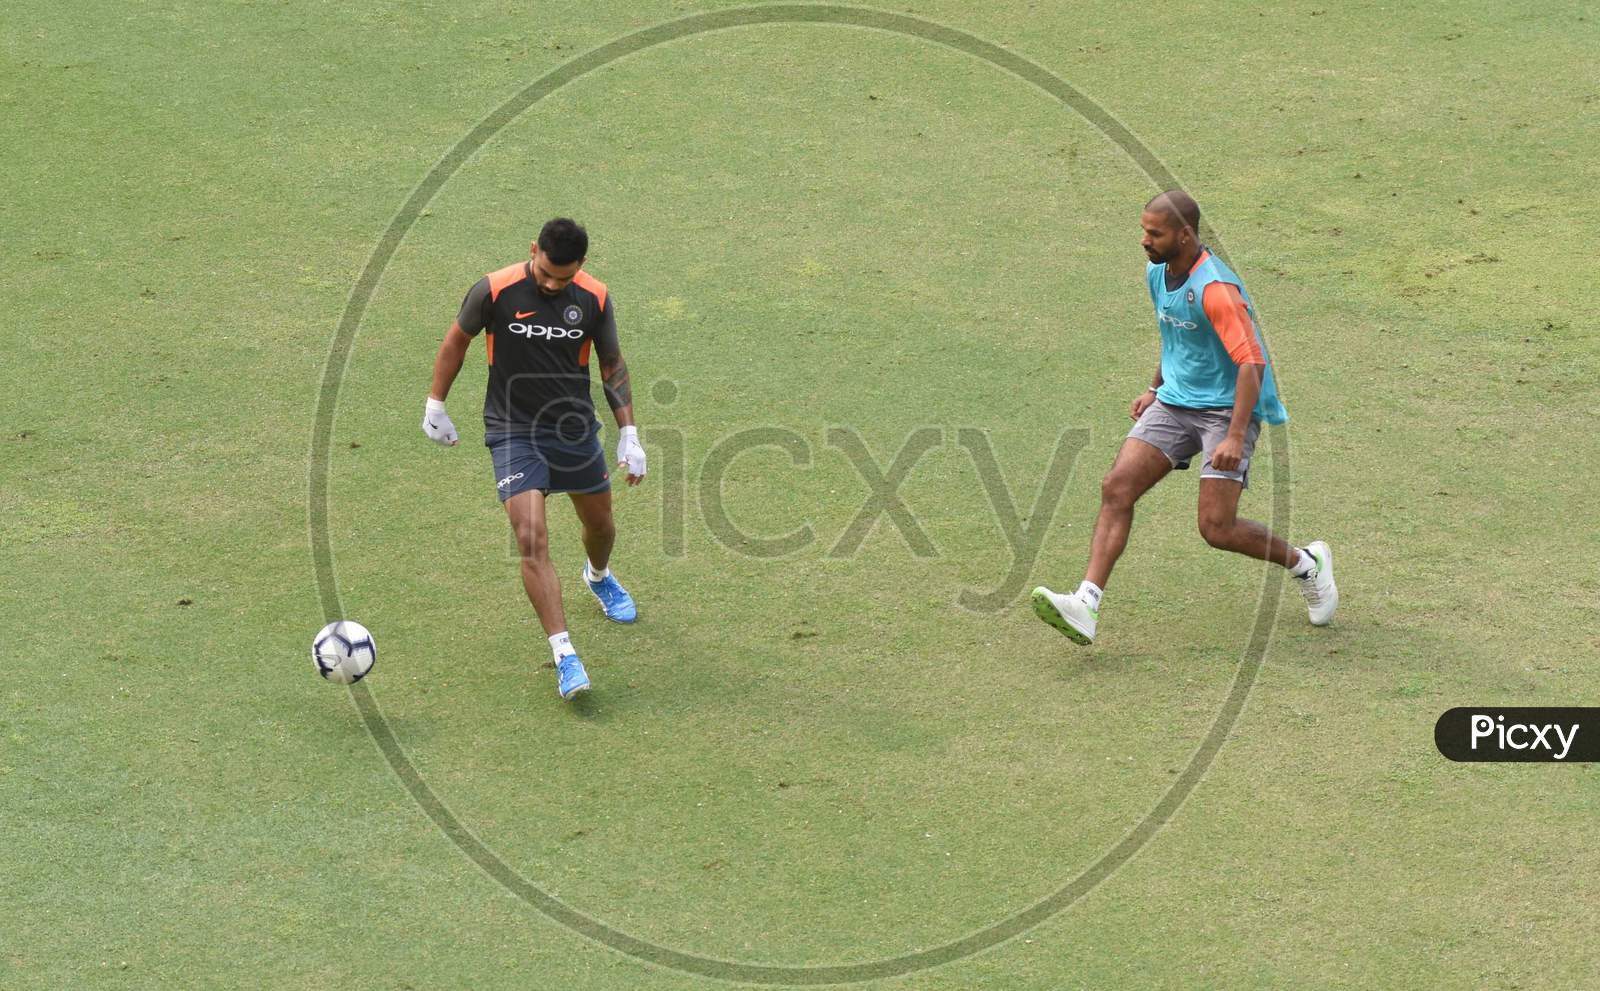 Team India Captain  Virat Kohli  And Sekhar Dhawan Plays Football During A Practice Session Ahead Of The First One Day International Cricket Match Against West Indies, At Aca Cricket Stadium, Barsapara In Guwahati